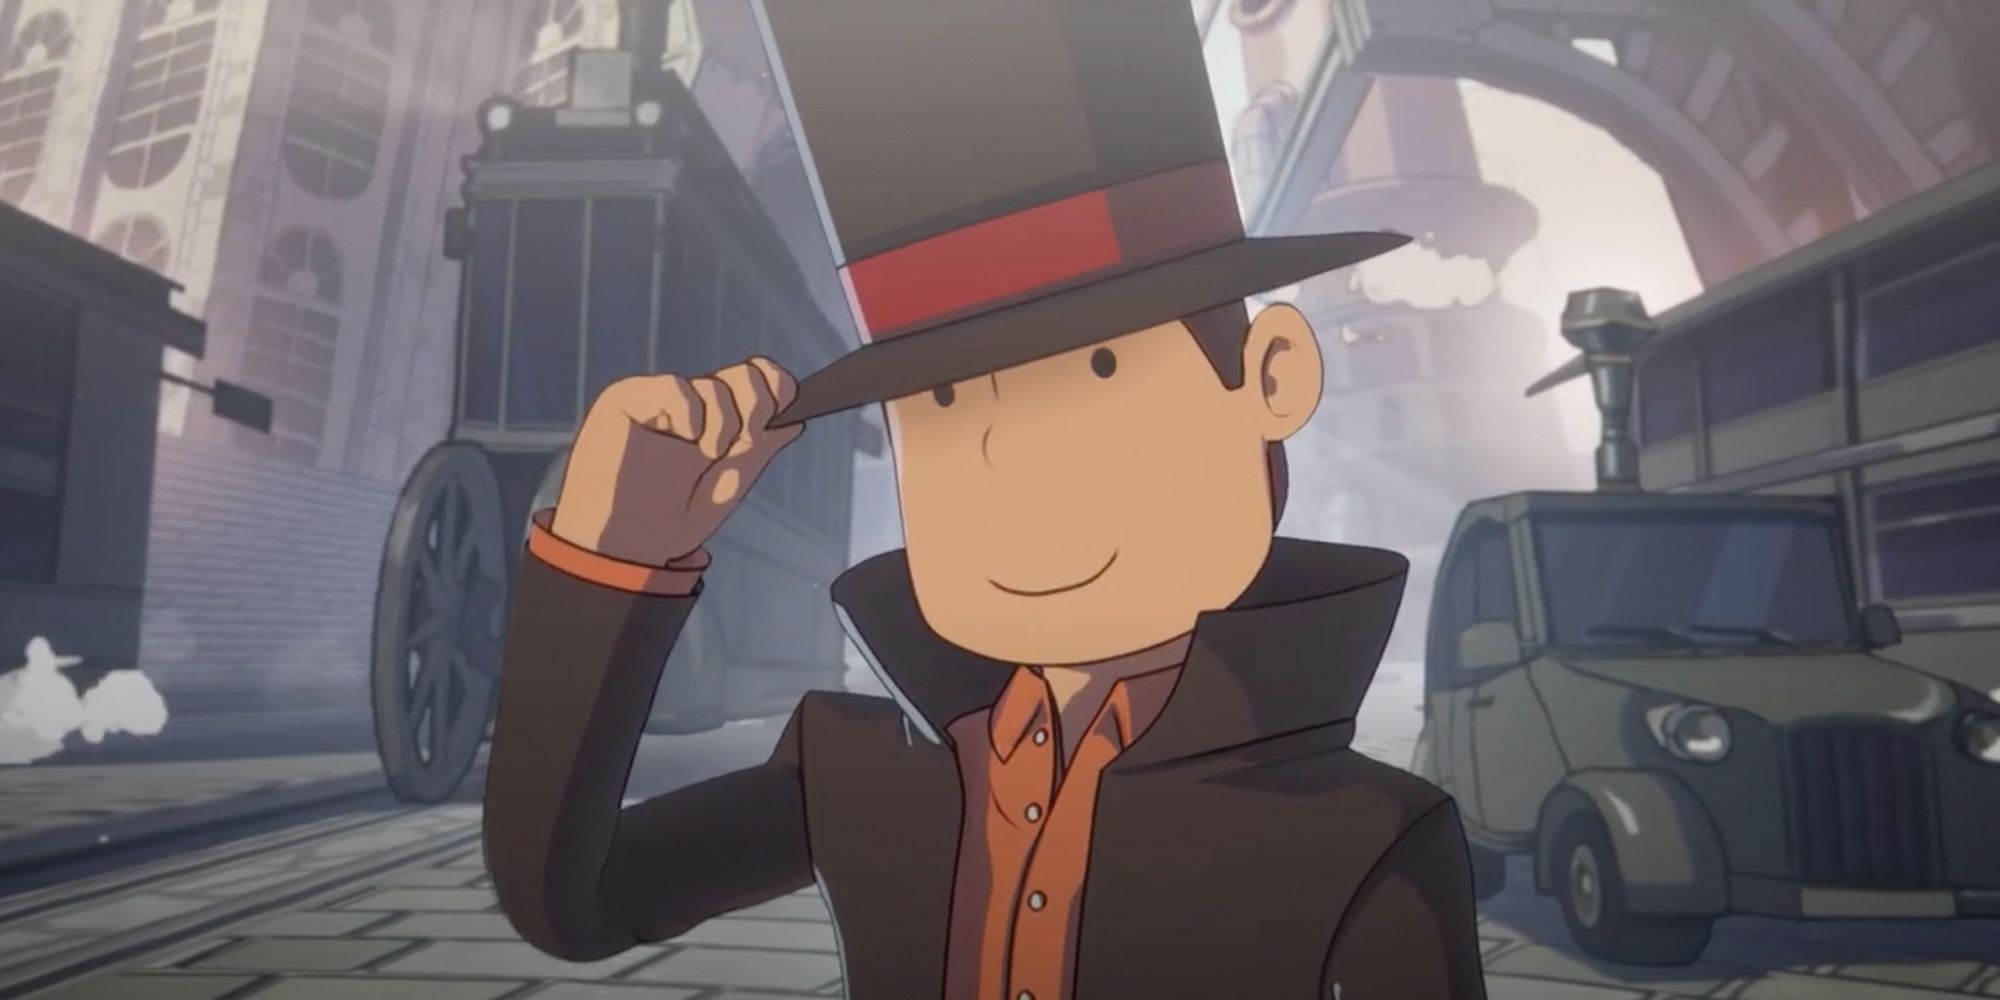 Professor Layton and the New Steam World for Nintendo Switch Revealed